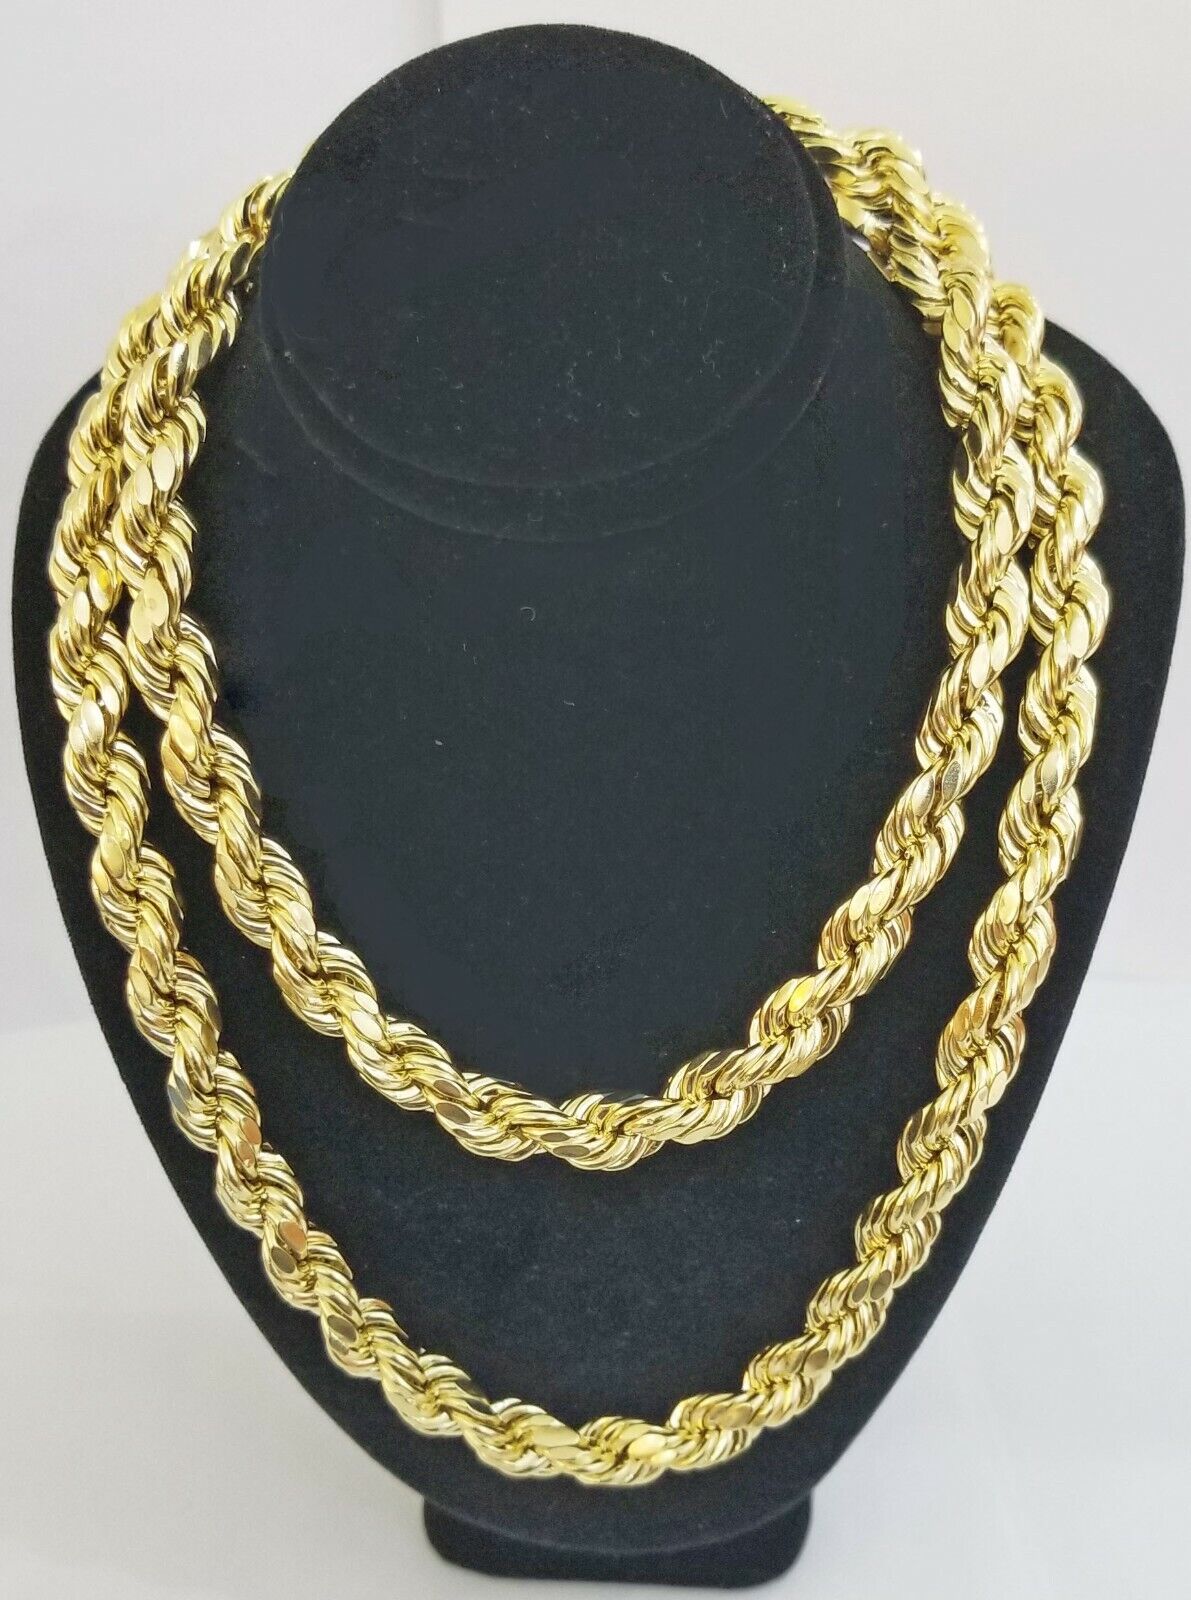 REAL 10k Yellow Gold Rope Chain necklace 10mm 26" Men's thick 10kt diamond cuts